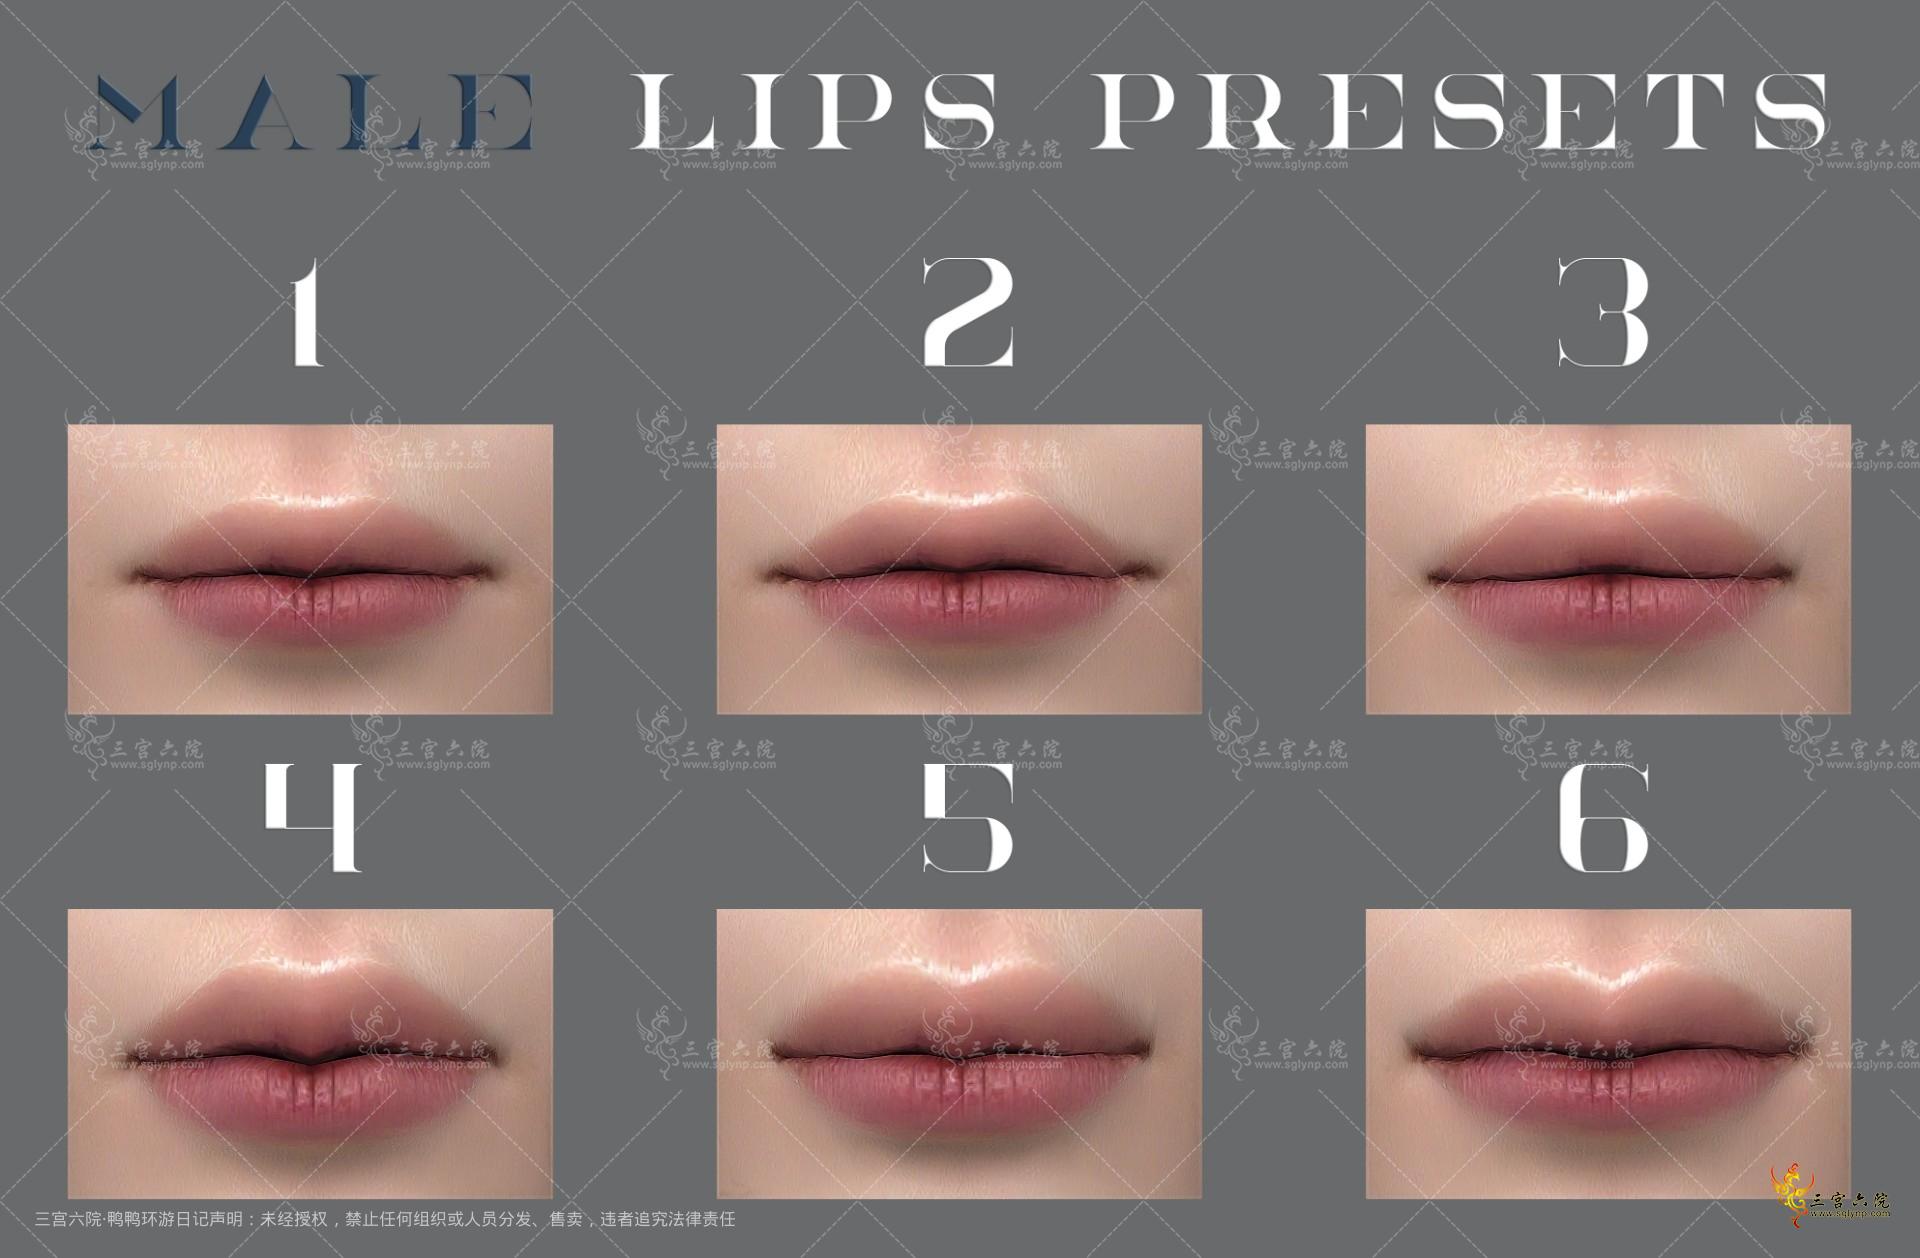 lips presets 1-6.png